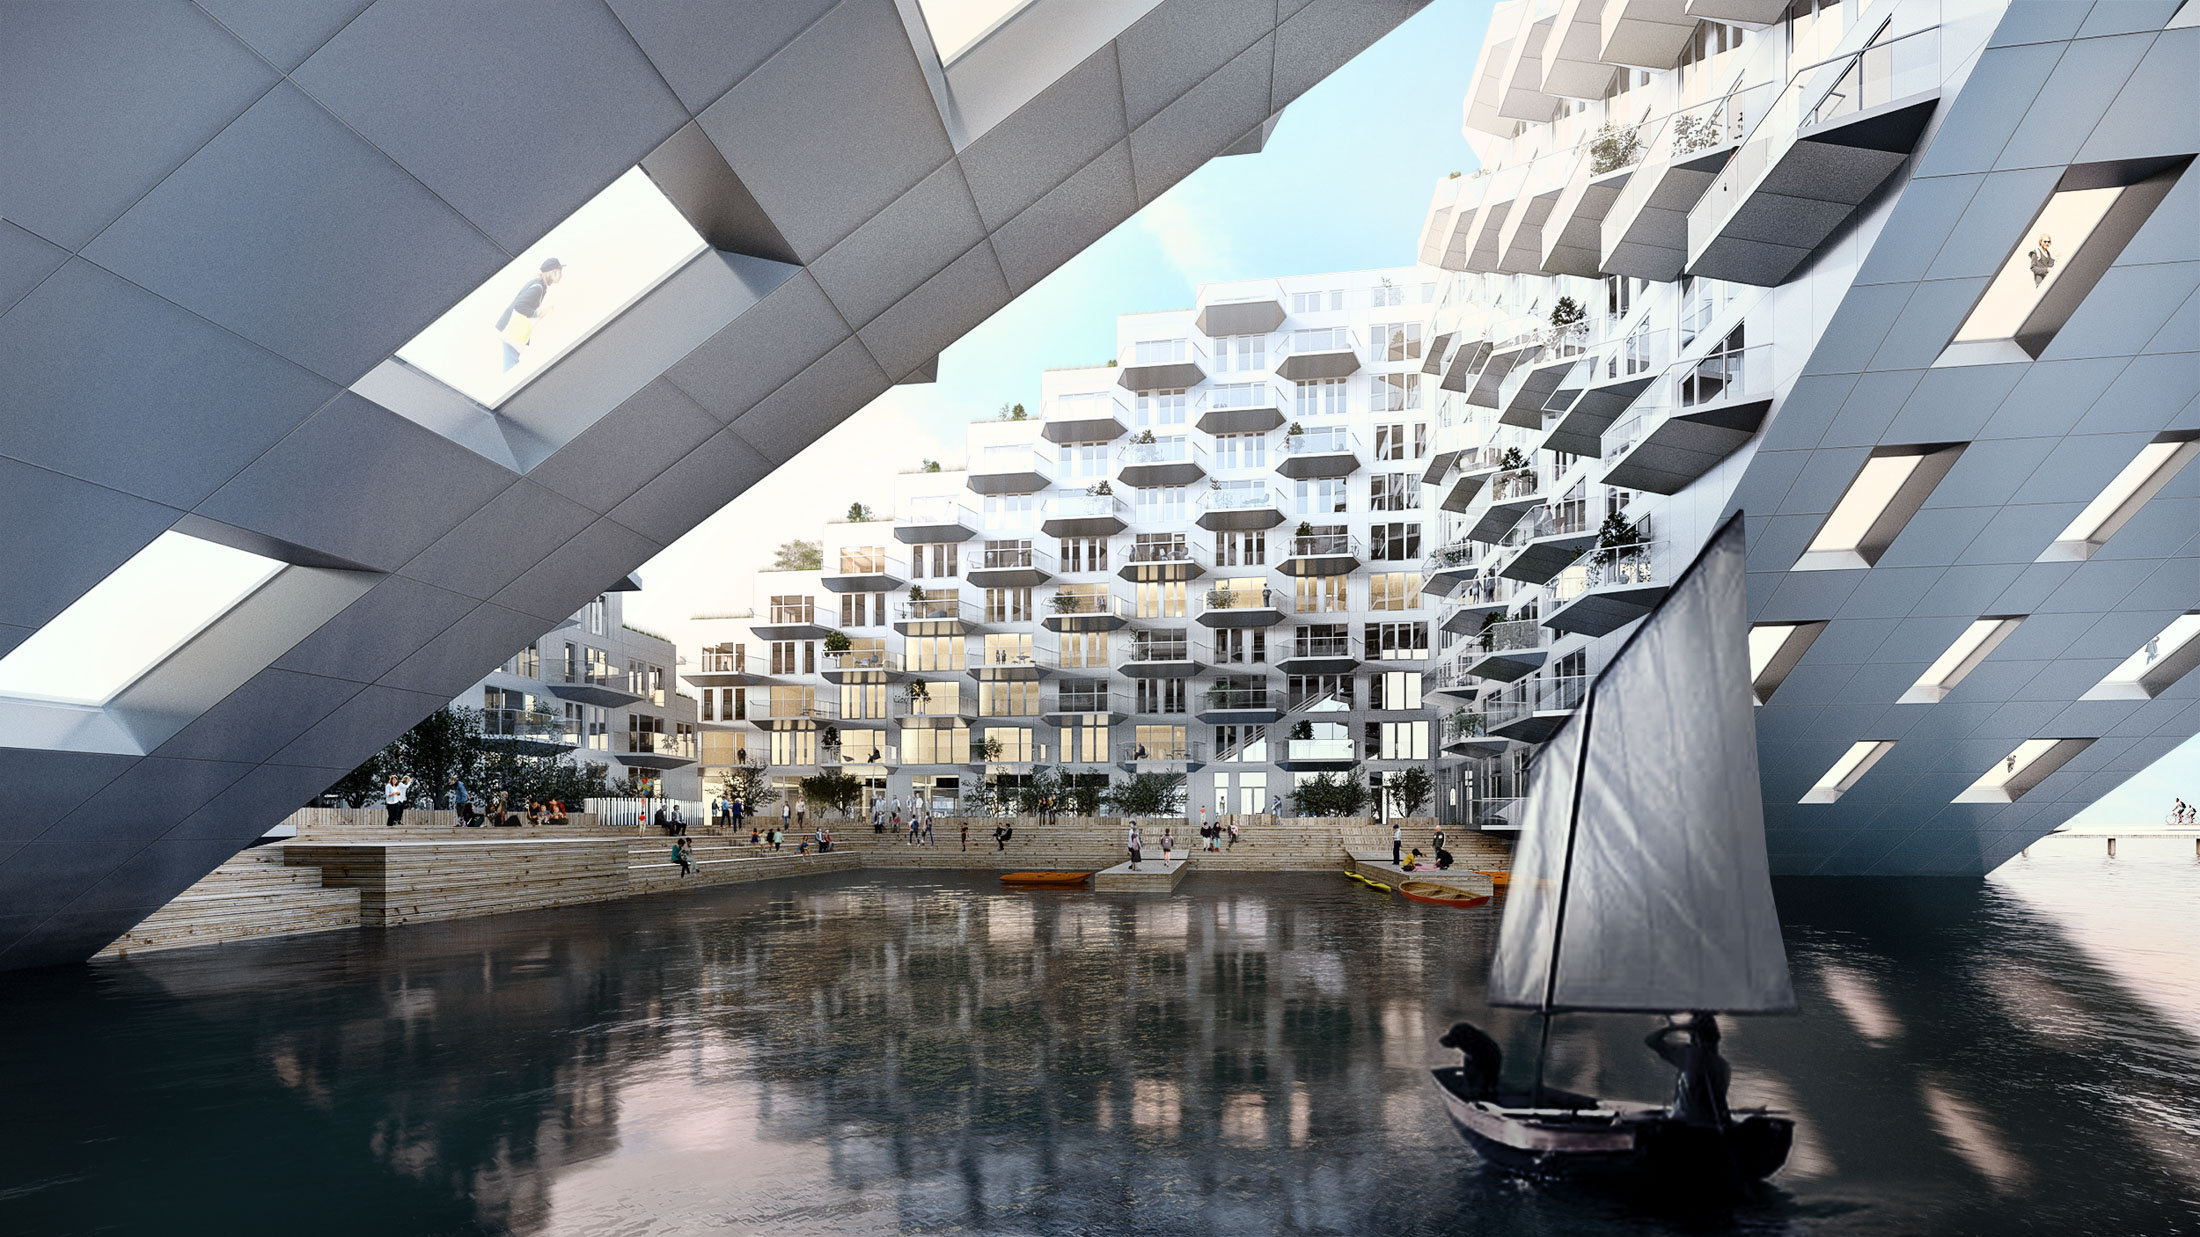 relates to Outdoor Space Tops Architect Bjarke Ingels’s Plan to Fix Urban Living